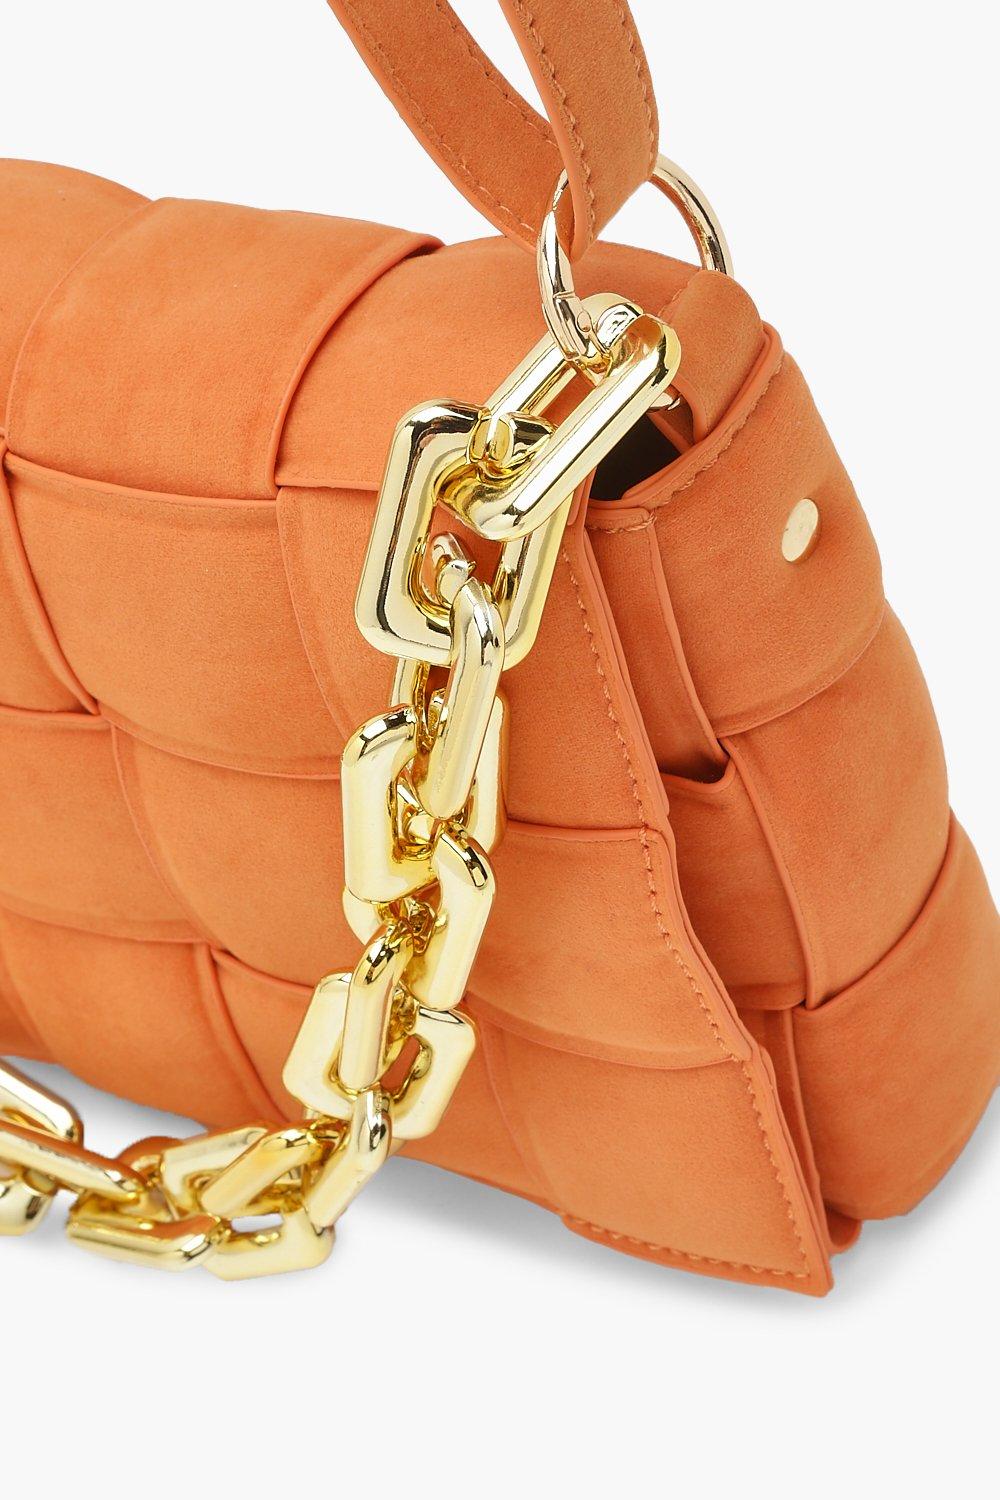 Neon Orange Quilted Flap Chain Square Bag Funky Style